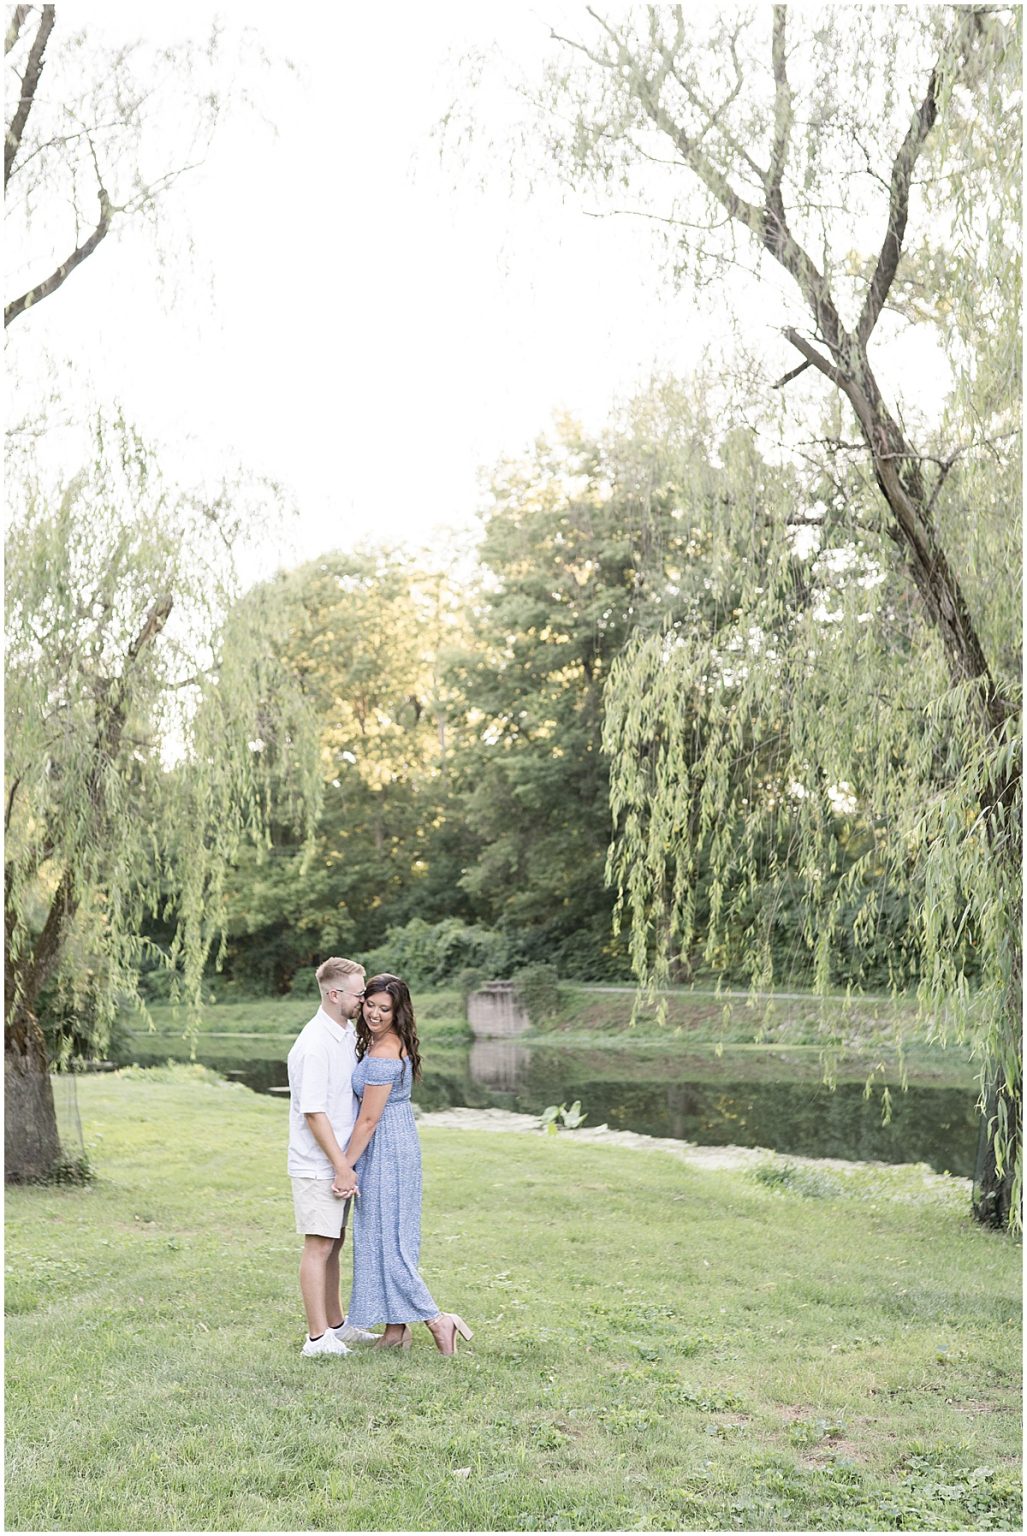 Summer Engagement Photos at Holcomb Gardens | Victoria Rayburn Photography